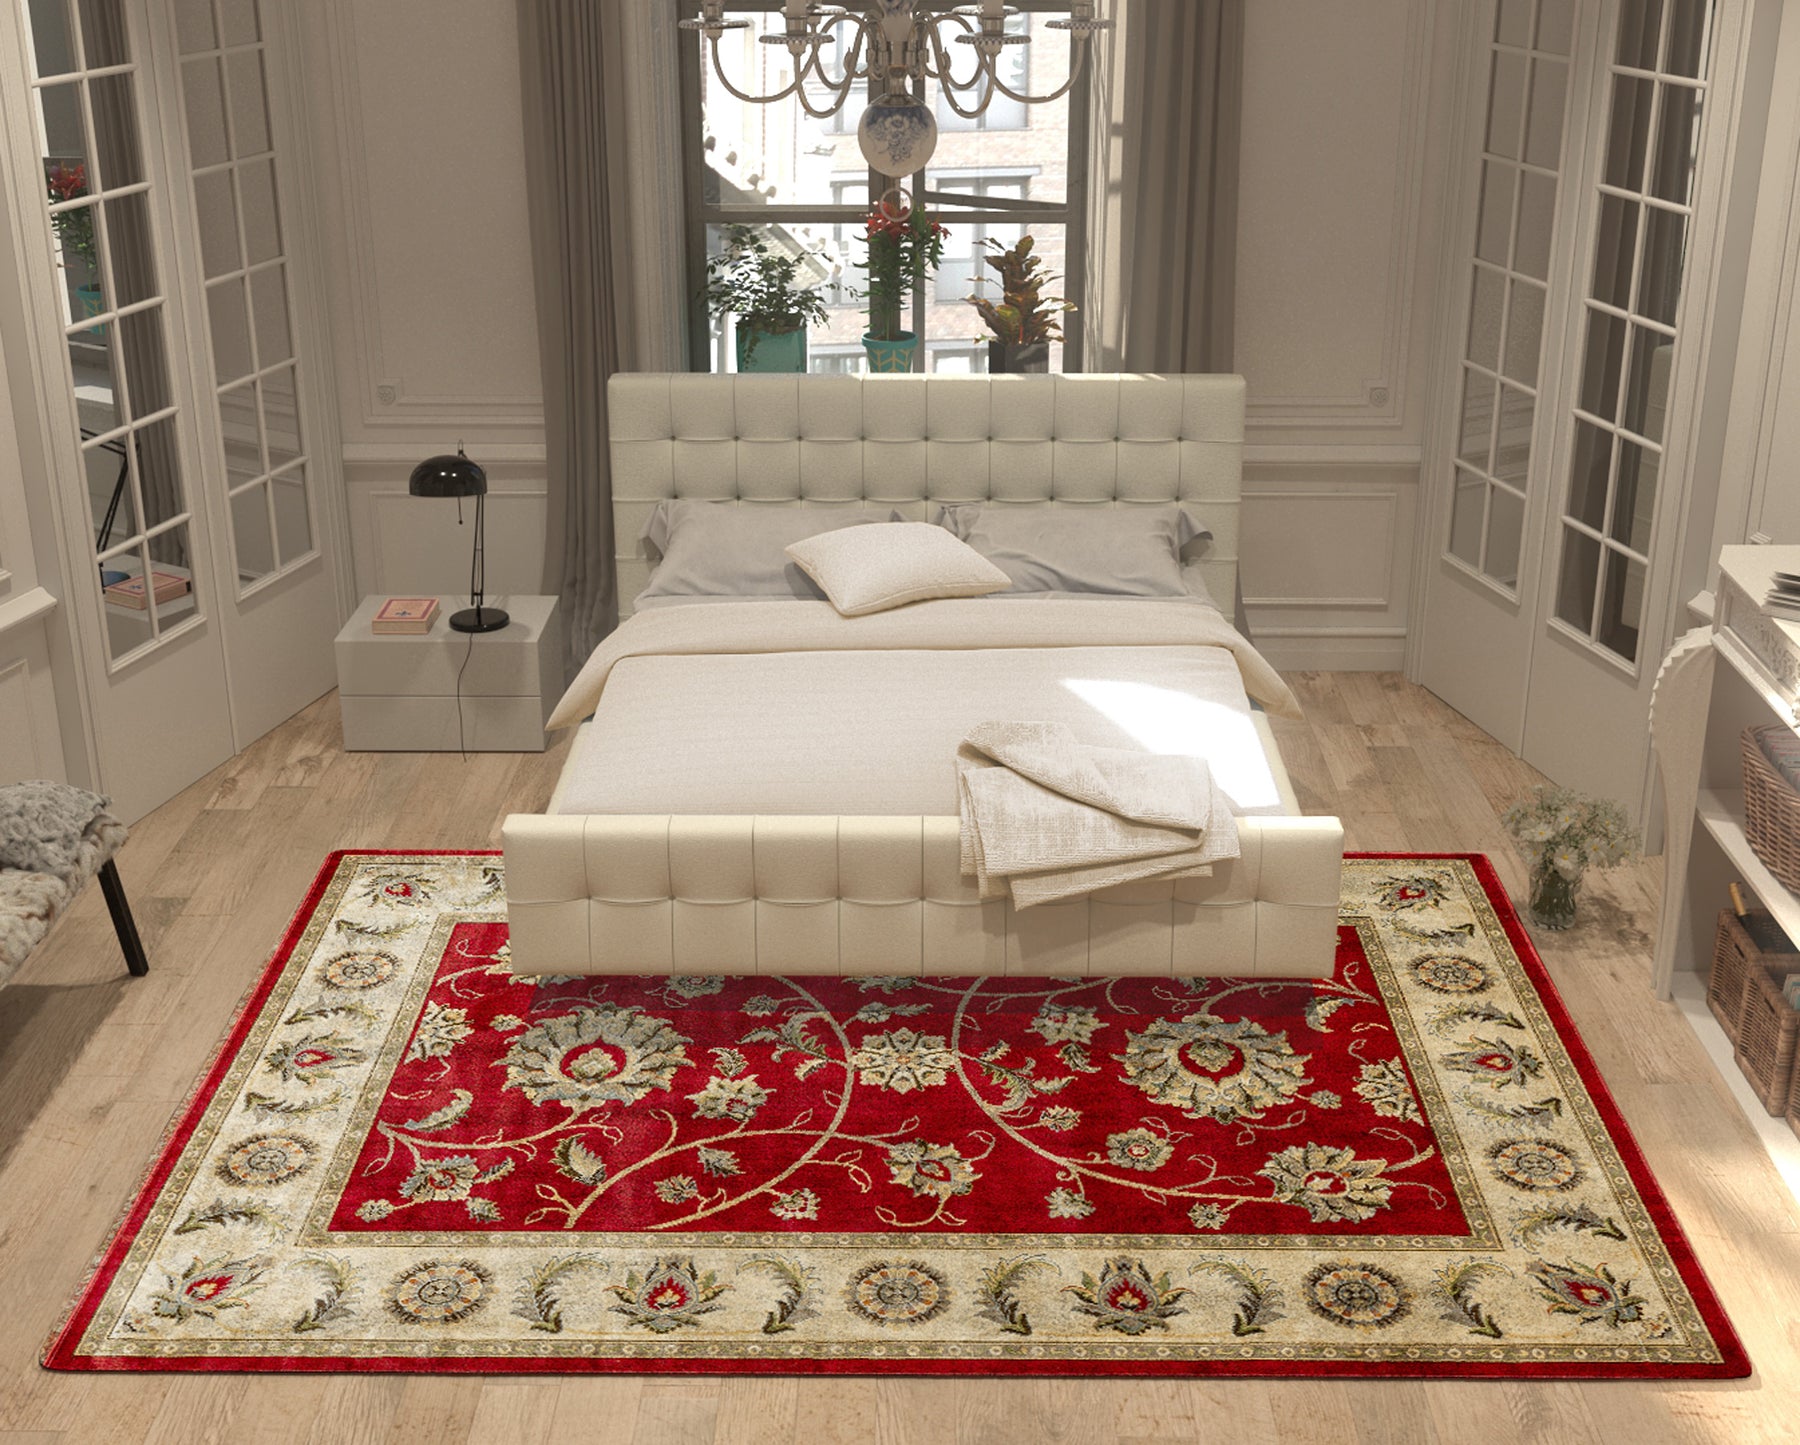 Pairing Rugs with Your Bed: A Bedroom Rug-Sizing and Placement Guide